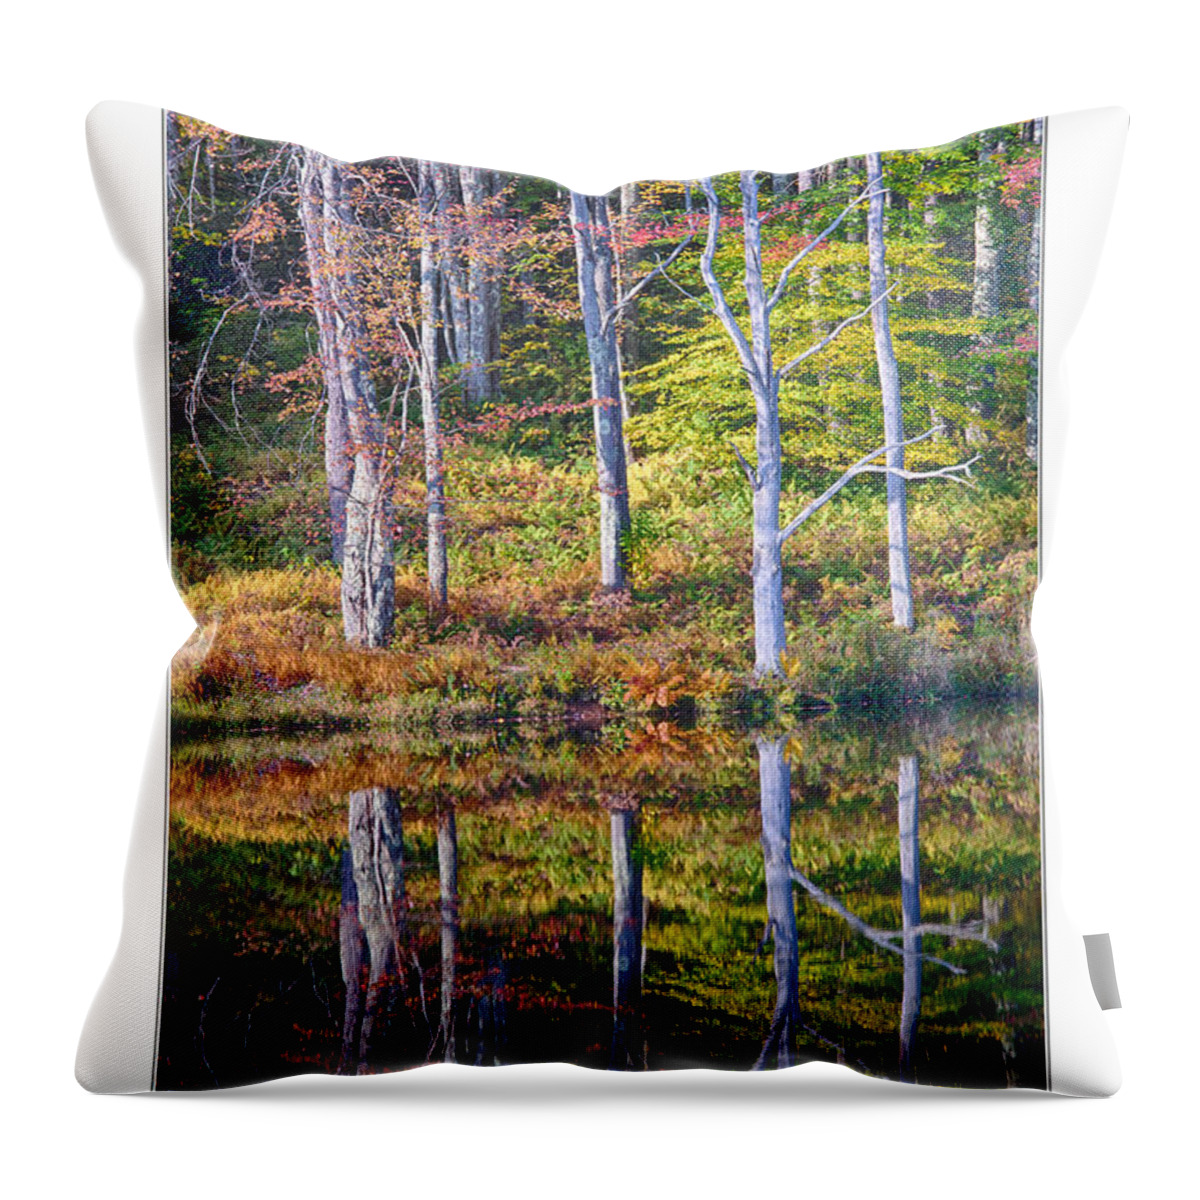  Throw Pillow featuring the photograph Tree Print by R Thomas Berner